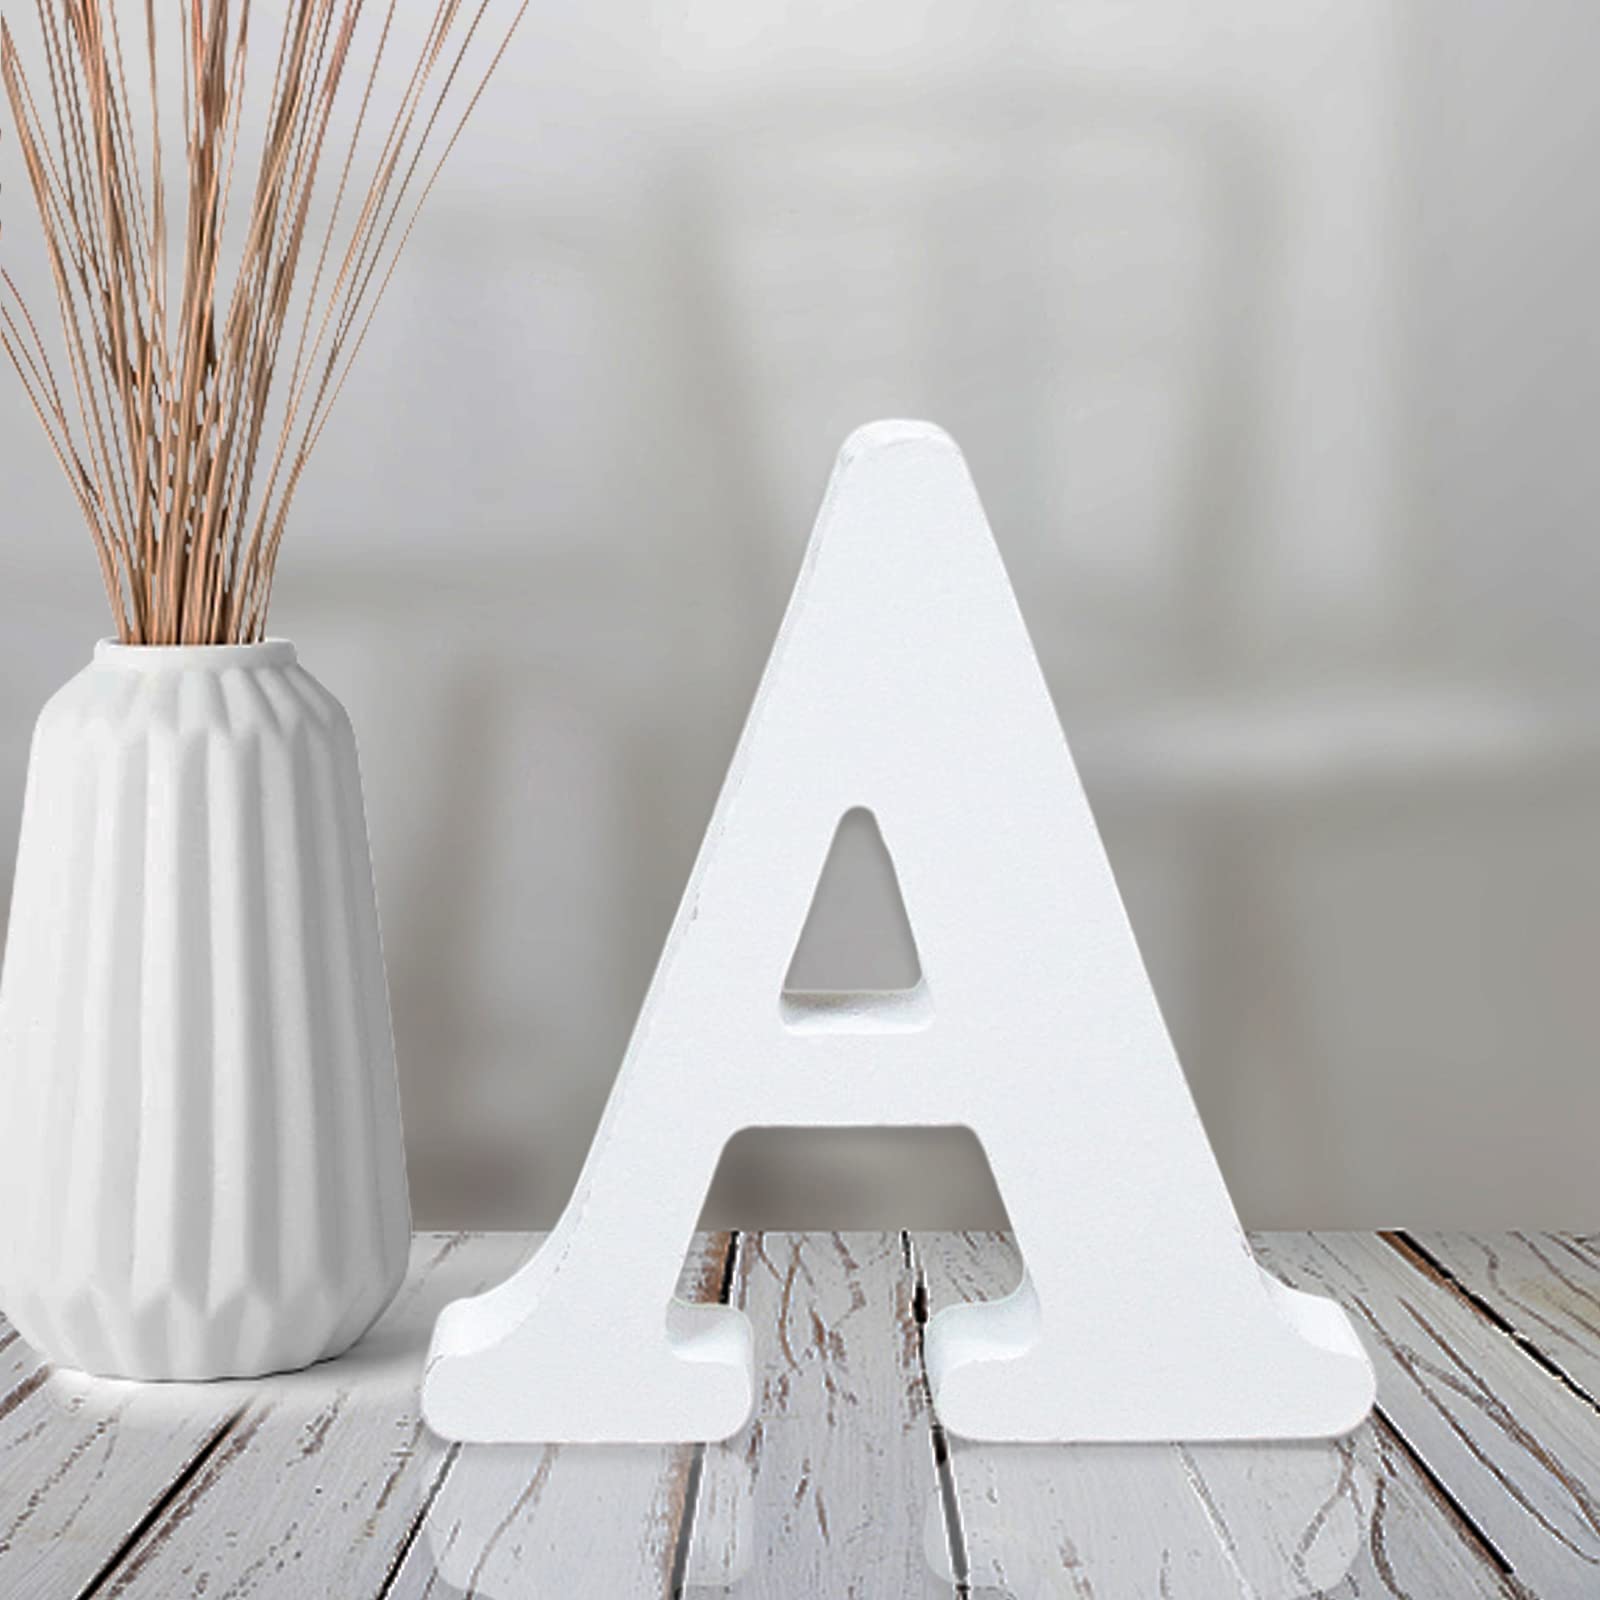 White Wood Letters 4 Inch, Wood Letters for DIY Party Projects (U) 